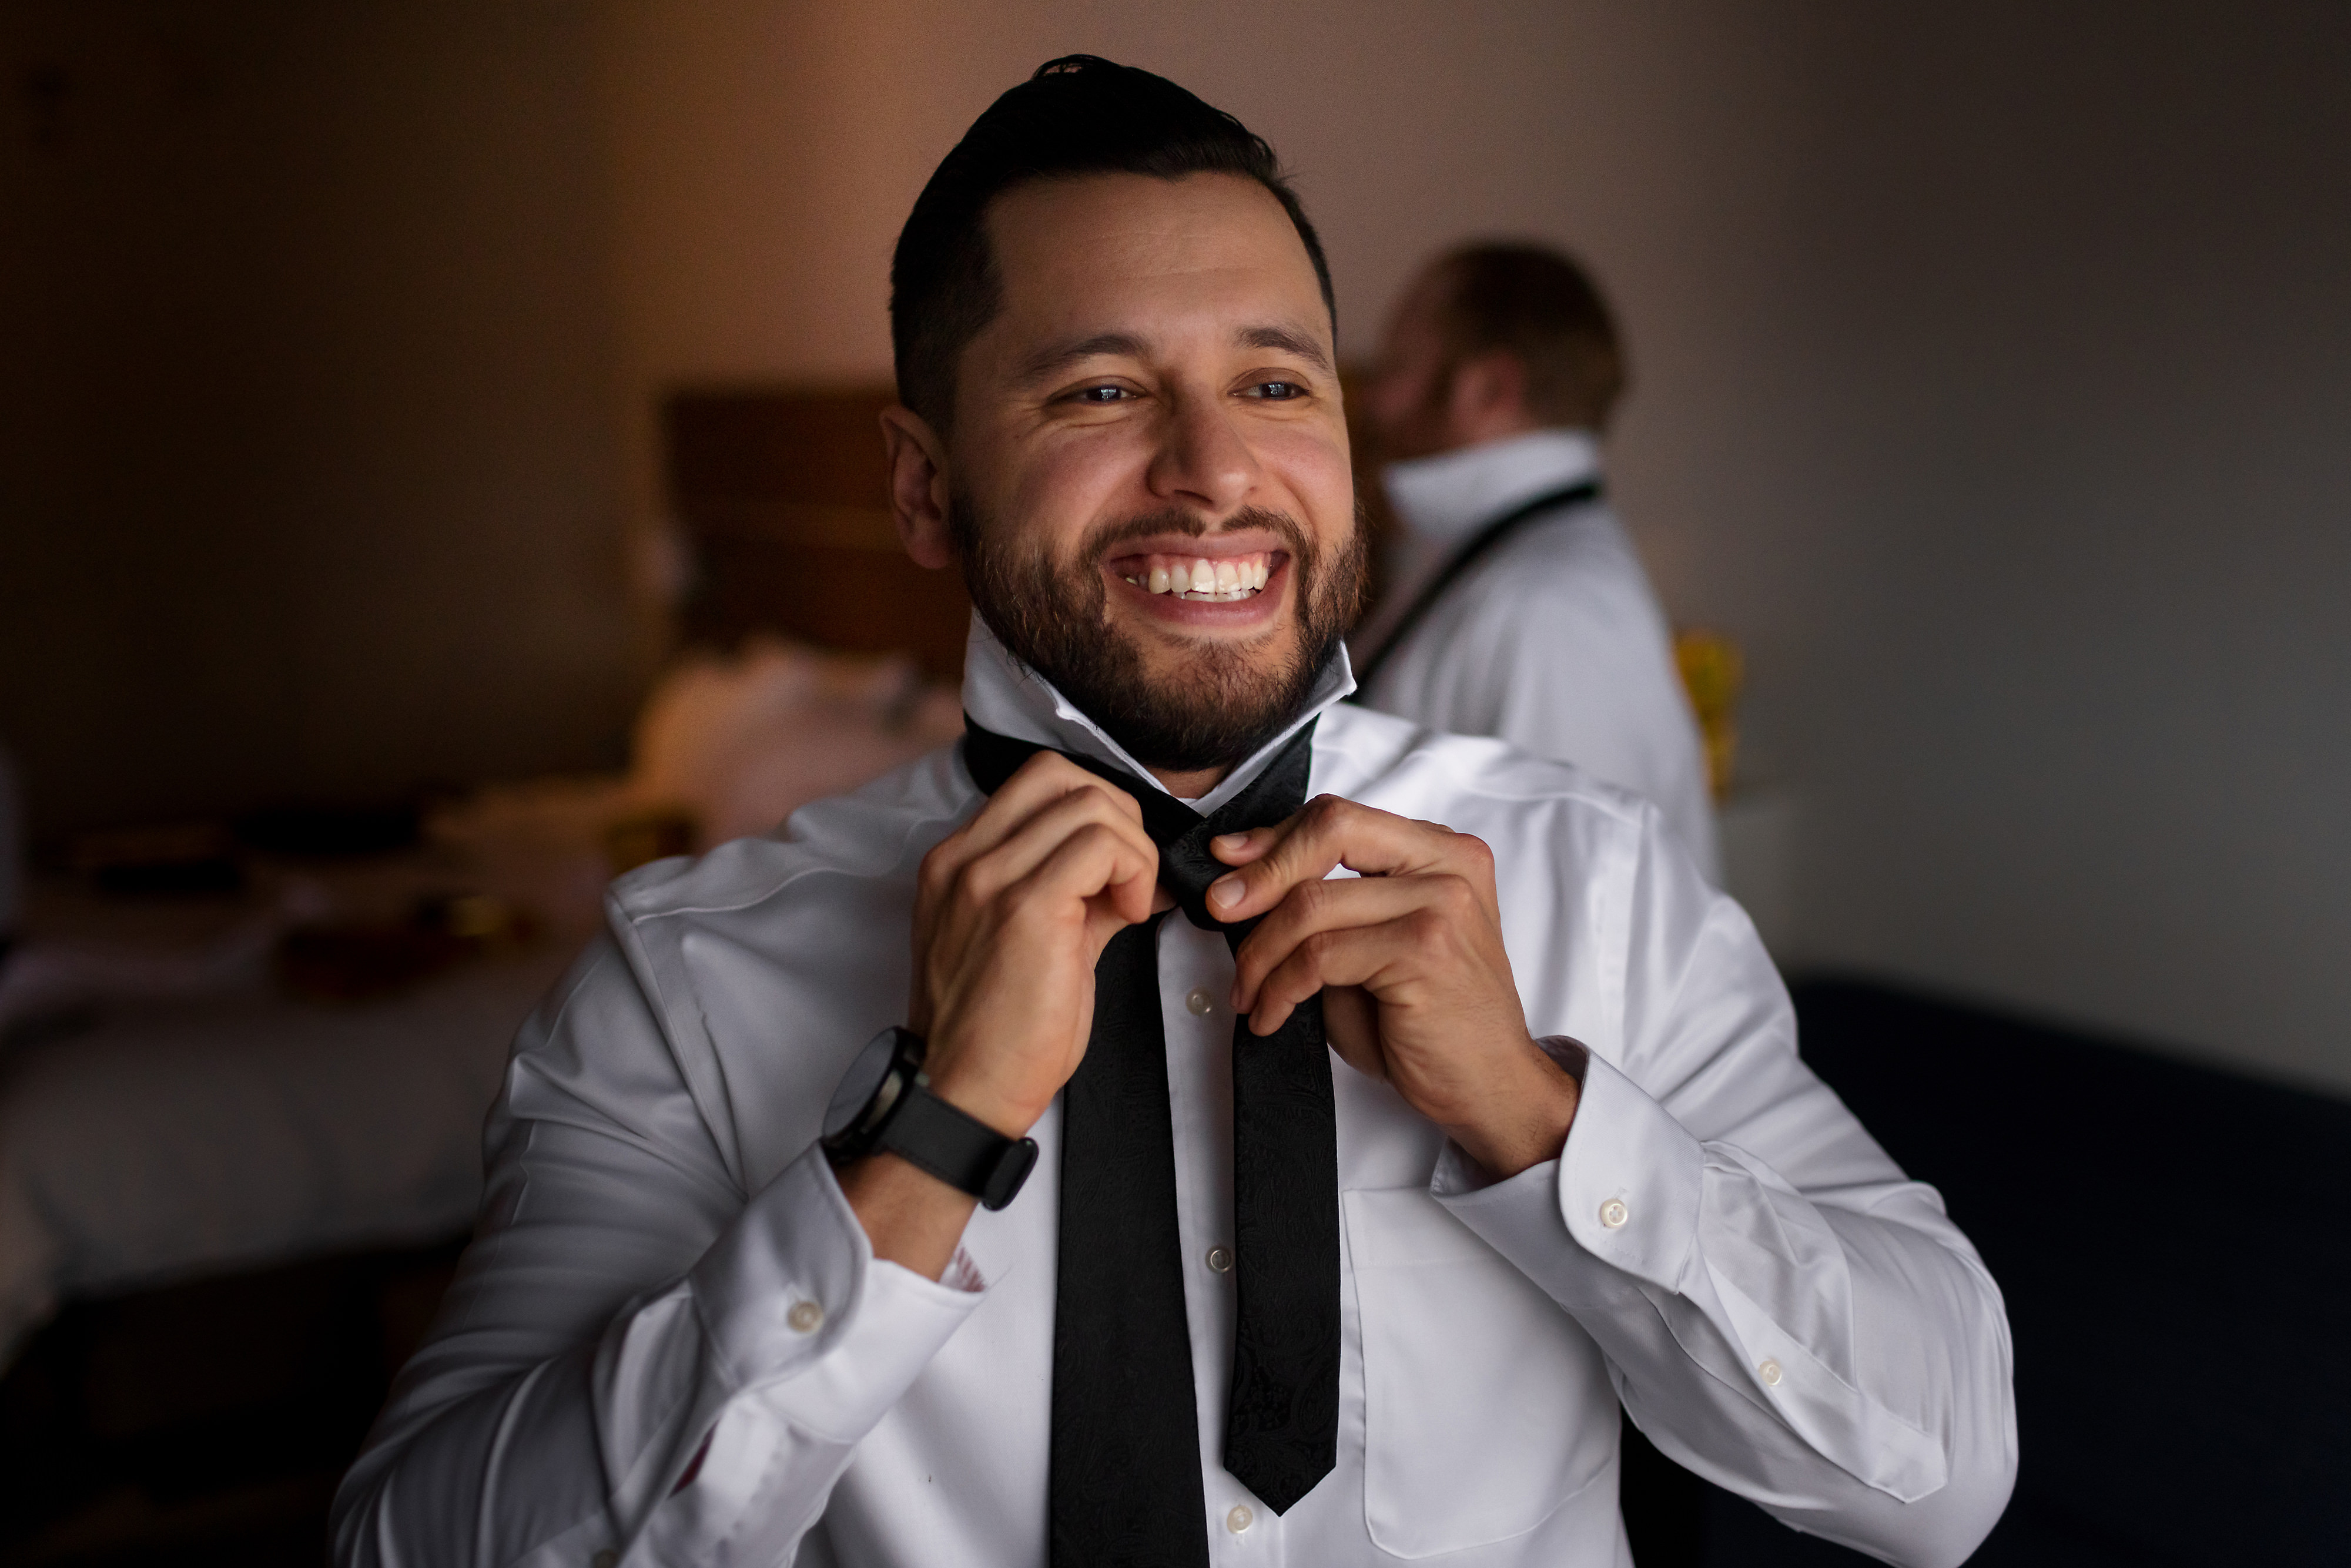 Groom puts on tie while getting ready for wedding